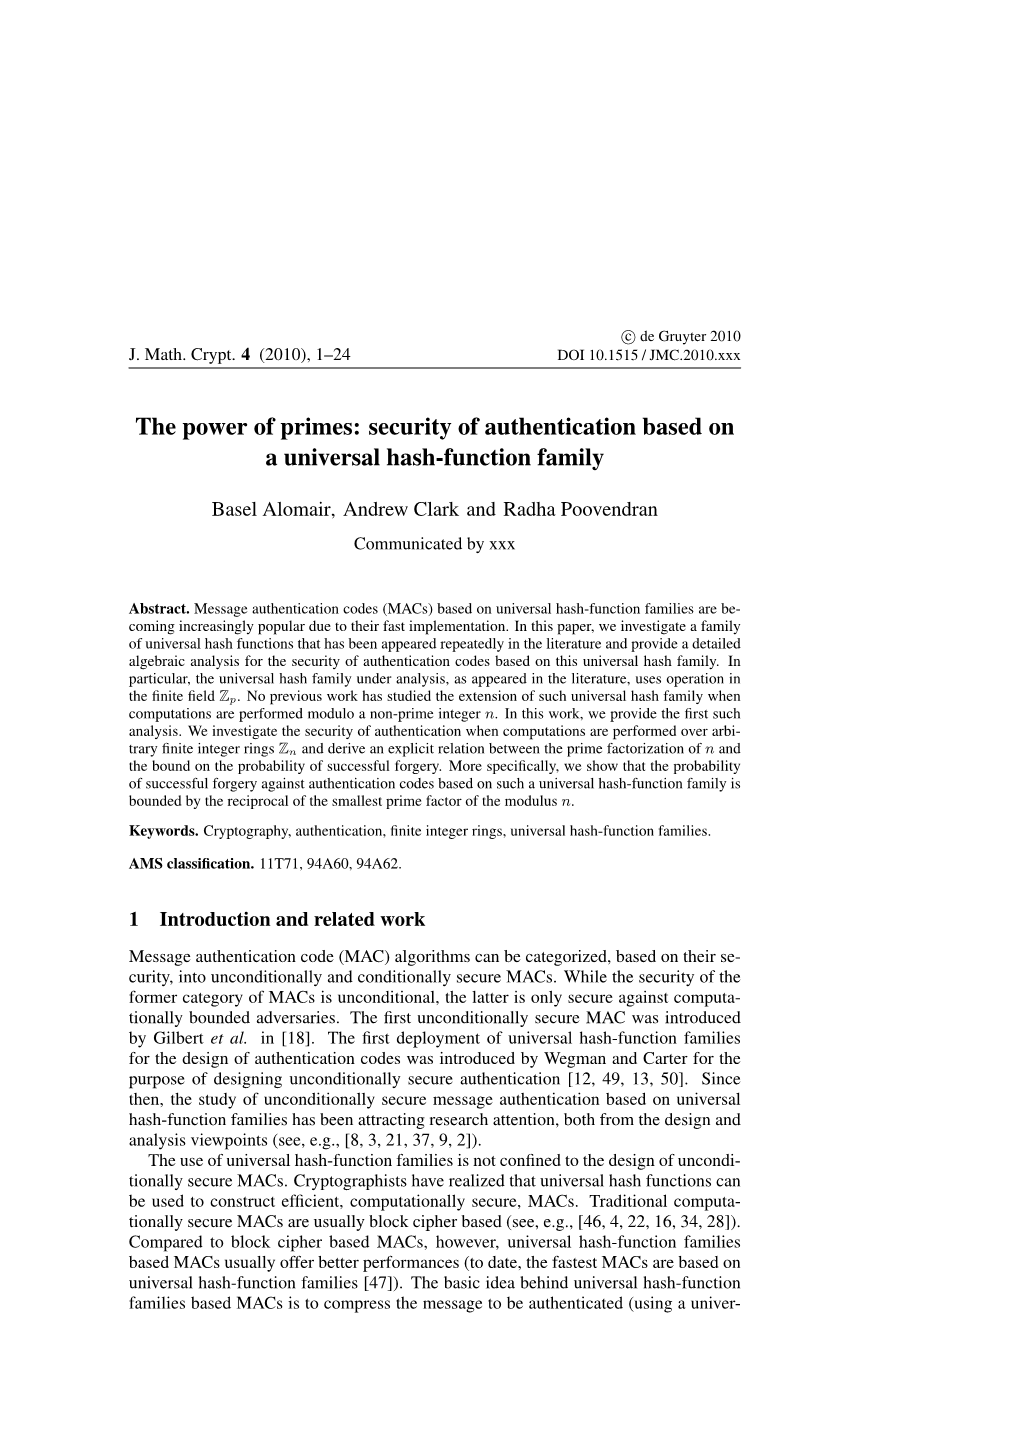 Security of Authentication Based on a Universal Hash-Function Family